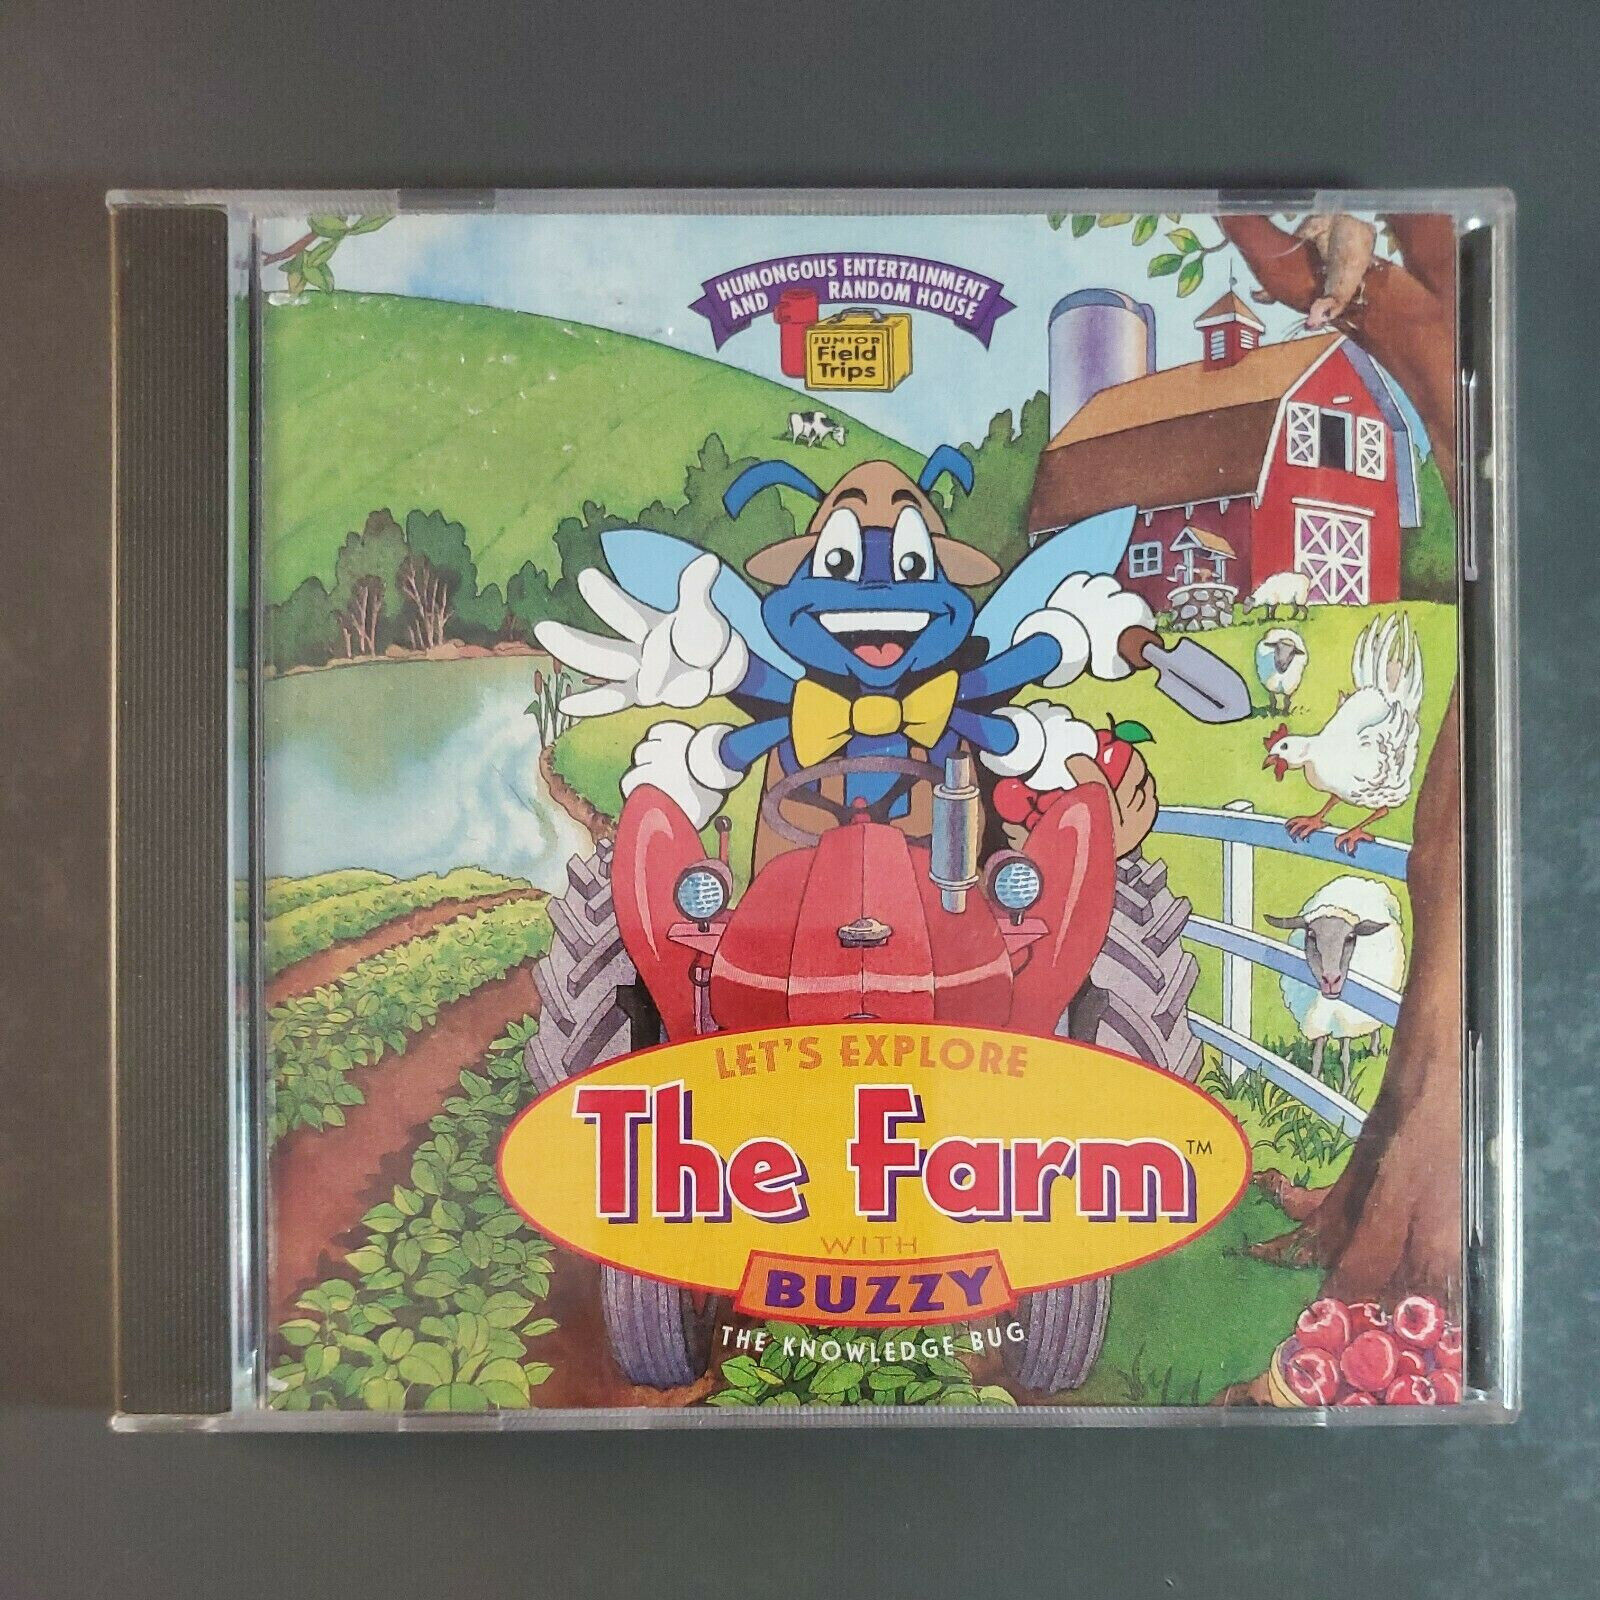 Let's Explore The Farm With Buzzy The Knowledge Bug (Vintage PC/Mac CD-ROM,1995)